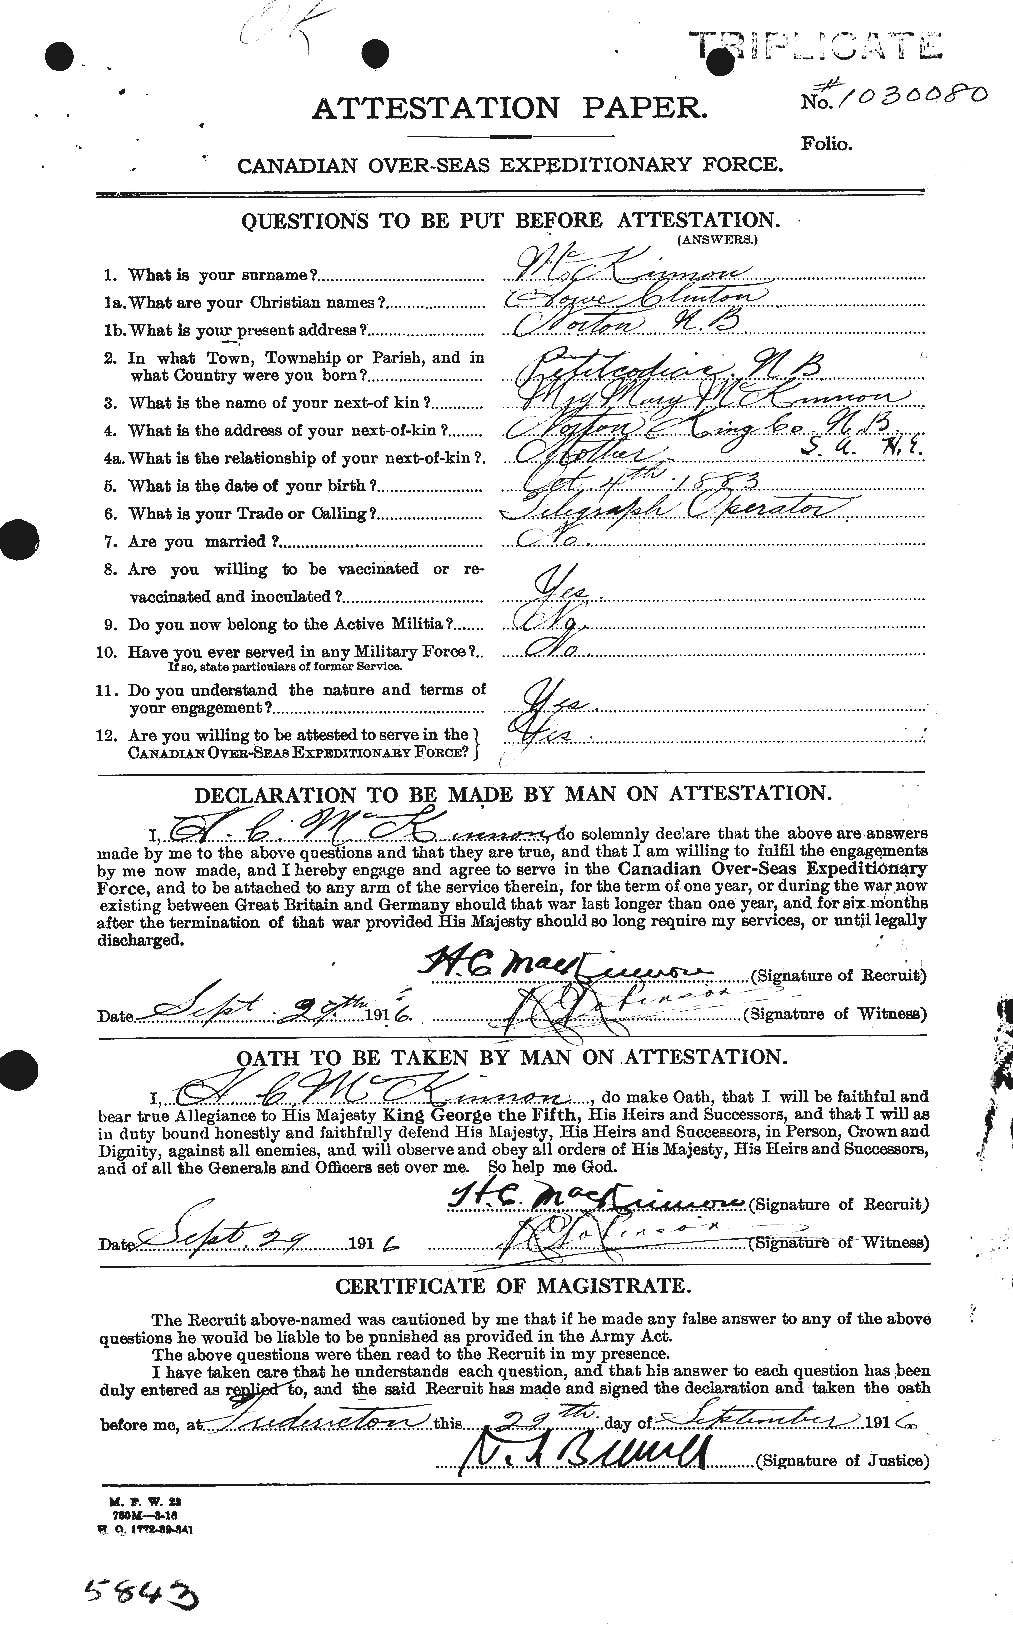 Personnel Records of the First World War - CEF 531473a